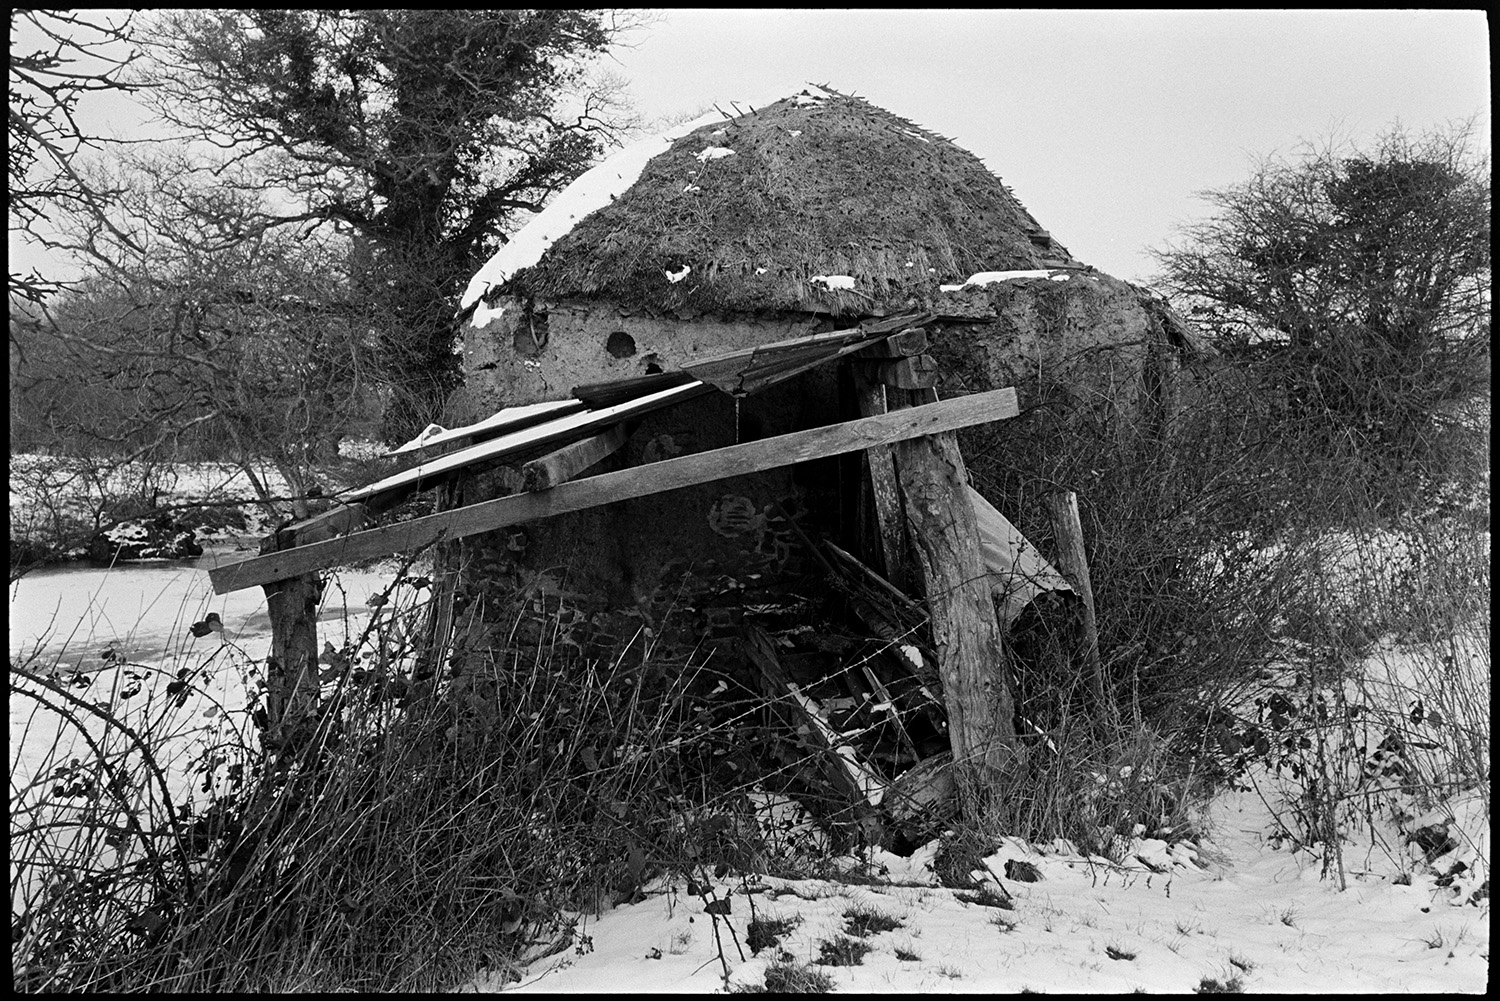 Snow, collapsing cob and thatch barns.
[A collapsed cob and thatch barn in a field covered in snow at Middle Week, Iddesleigh.]